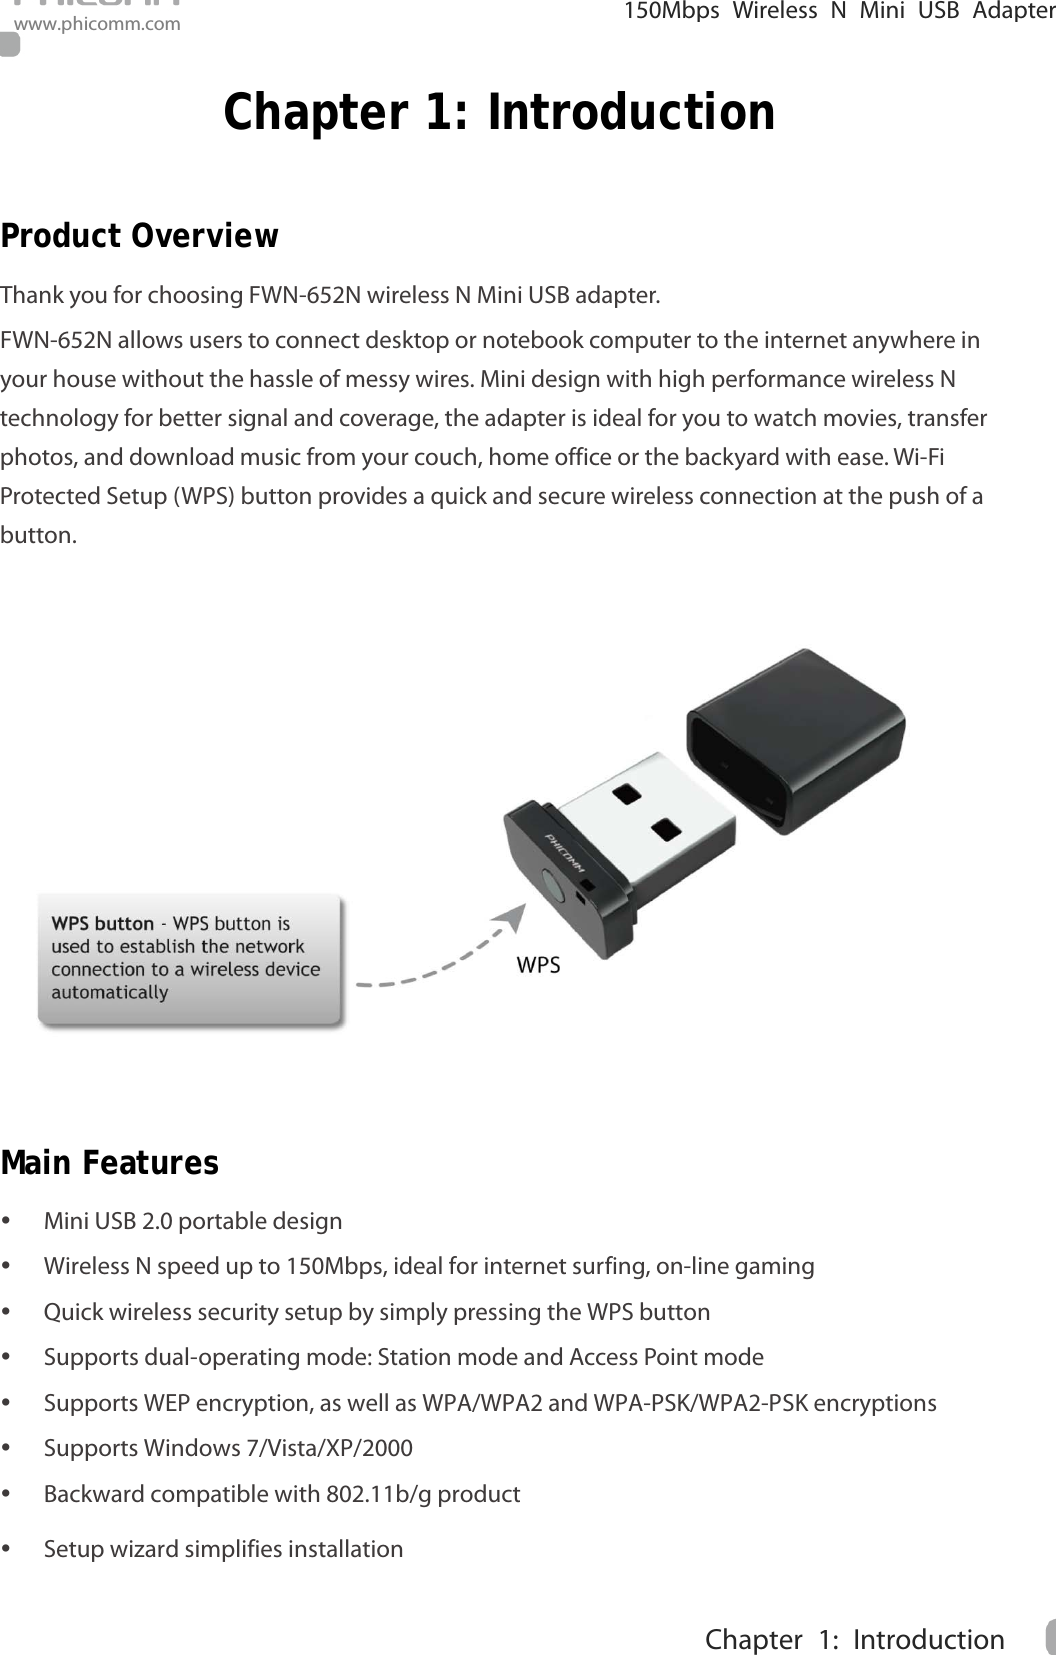                                                            150Mbps Wireless N Mini  USB Adapter www.phicomm.com 1 Chapter 1: Introduction  Chapter 1: Introduction Product Overview Thank you for choosing FWN-652N wireless N Mini USB adapter.   FWN-652N allows users to connect desktop or notebook computer to the internet anywhere in your house without the hassle of messy wires. Mini design with high performance wireless N technology for better signal and coverage, the adapter is ideal for you to watch movies, transfer photos, and download music from your couch, home office or the backyard with ease. Wi-Fi Protected Setup (WPS) button provides a quick and secure wireless connection at the push of a button.  Main Features  Mini USB 2.0 portable design  Wireless N speed up to 150Mbps, ideal for internet surfing, on-line gaming  Quick wireless security setup by simply pressing the WPS button  Supports dual-operating mode: Station mode and Access Point mode  Supports WEP encryption, as well as WPA/WPA2 and WPA-PSK/WPA2-PSK encryptions    Supports Windows 7/Vista/XP/2000  Backward compatible with 802.11b/g product    Setup wizard simplifies installation 